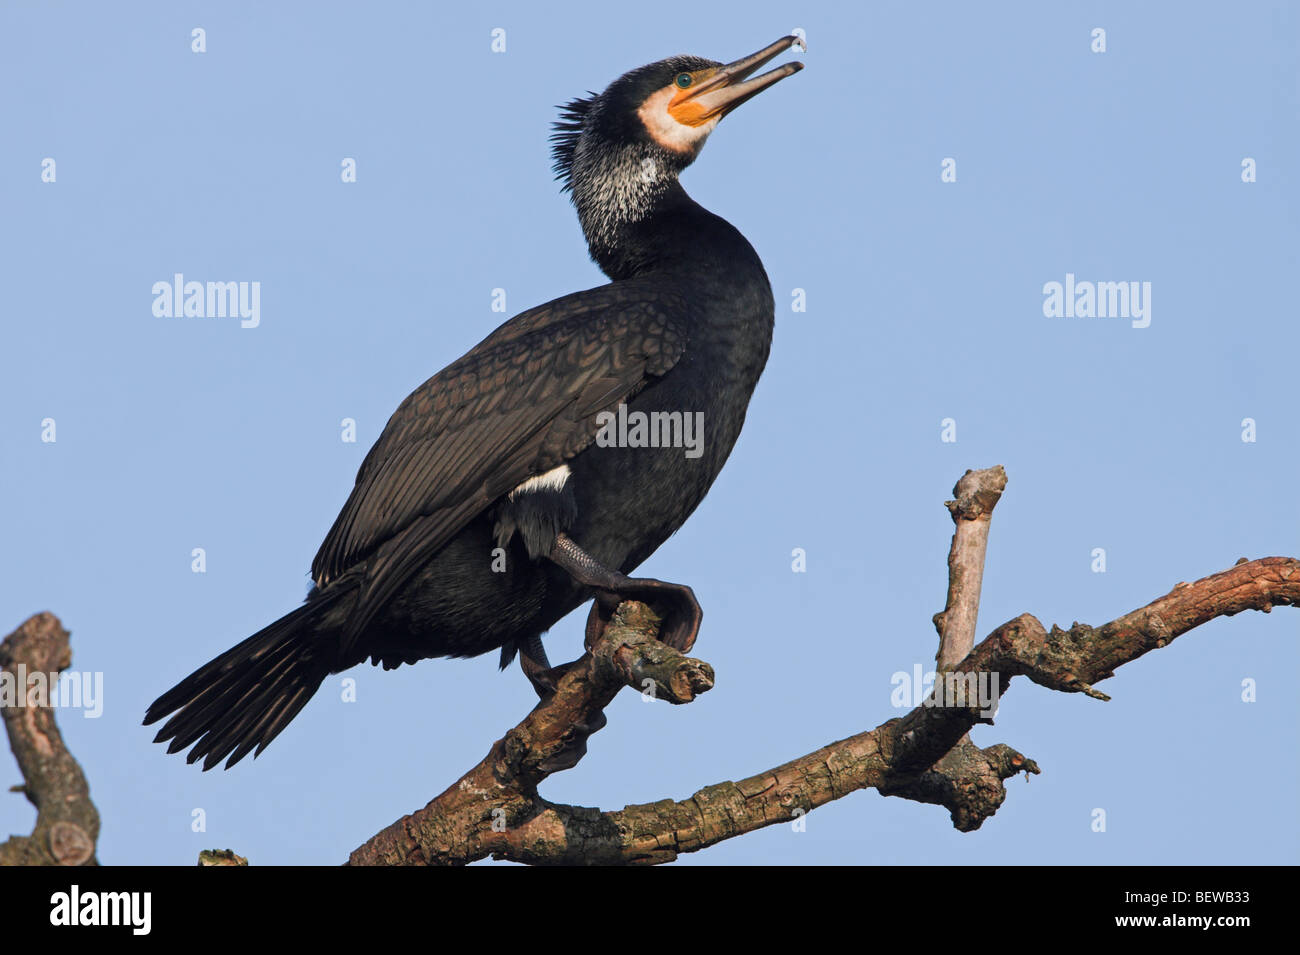 Great Cormorant (Phalacrocorax carbo) sitting on branch, side view Stock Photo